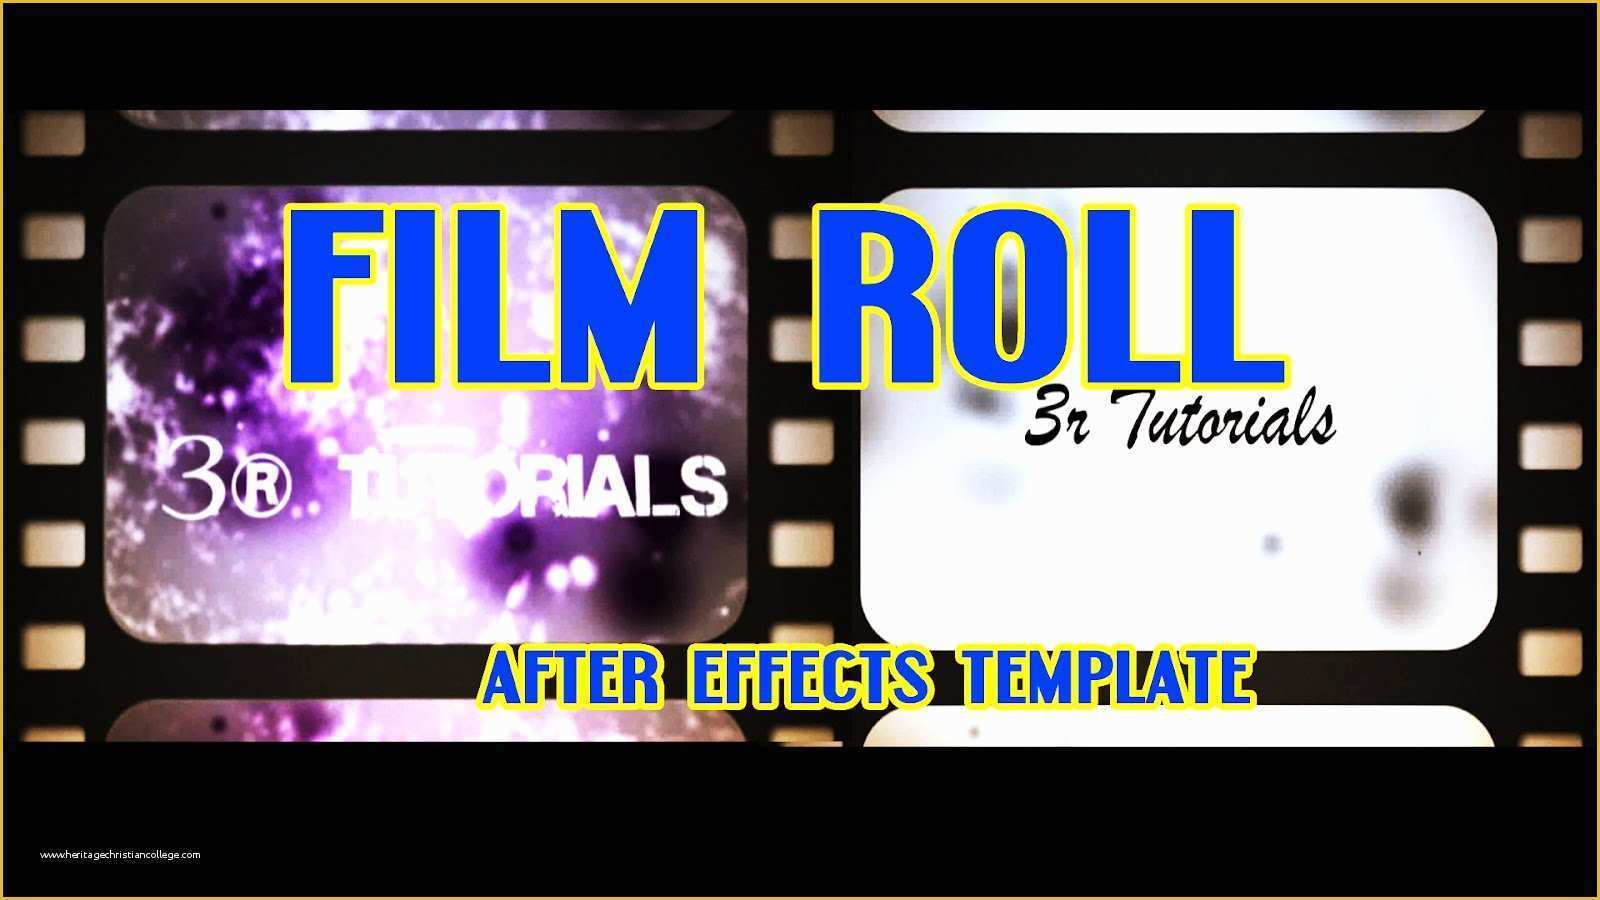 Adobe after Effects Cs5 Intro Templates Free Download Of Film Roll Free Adobe after Effects Intro Templates Cs4